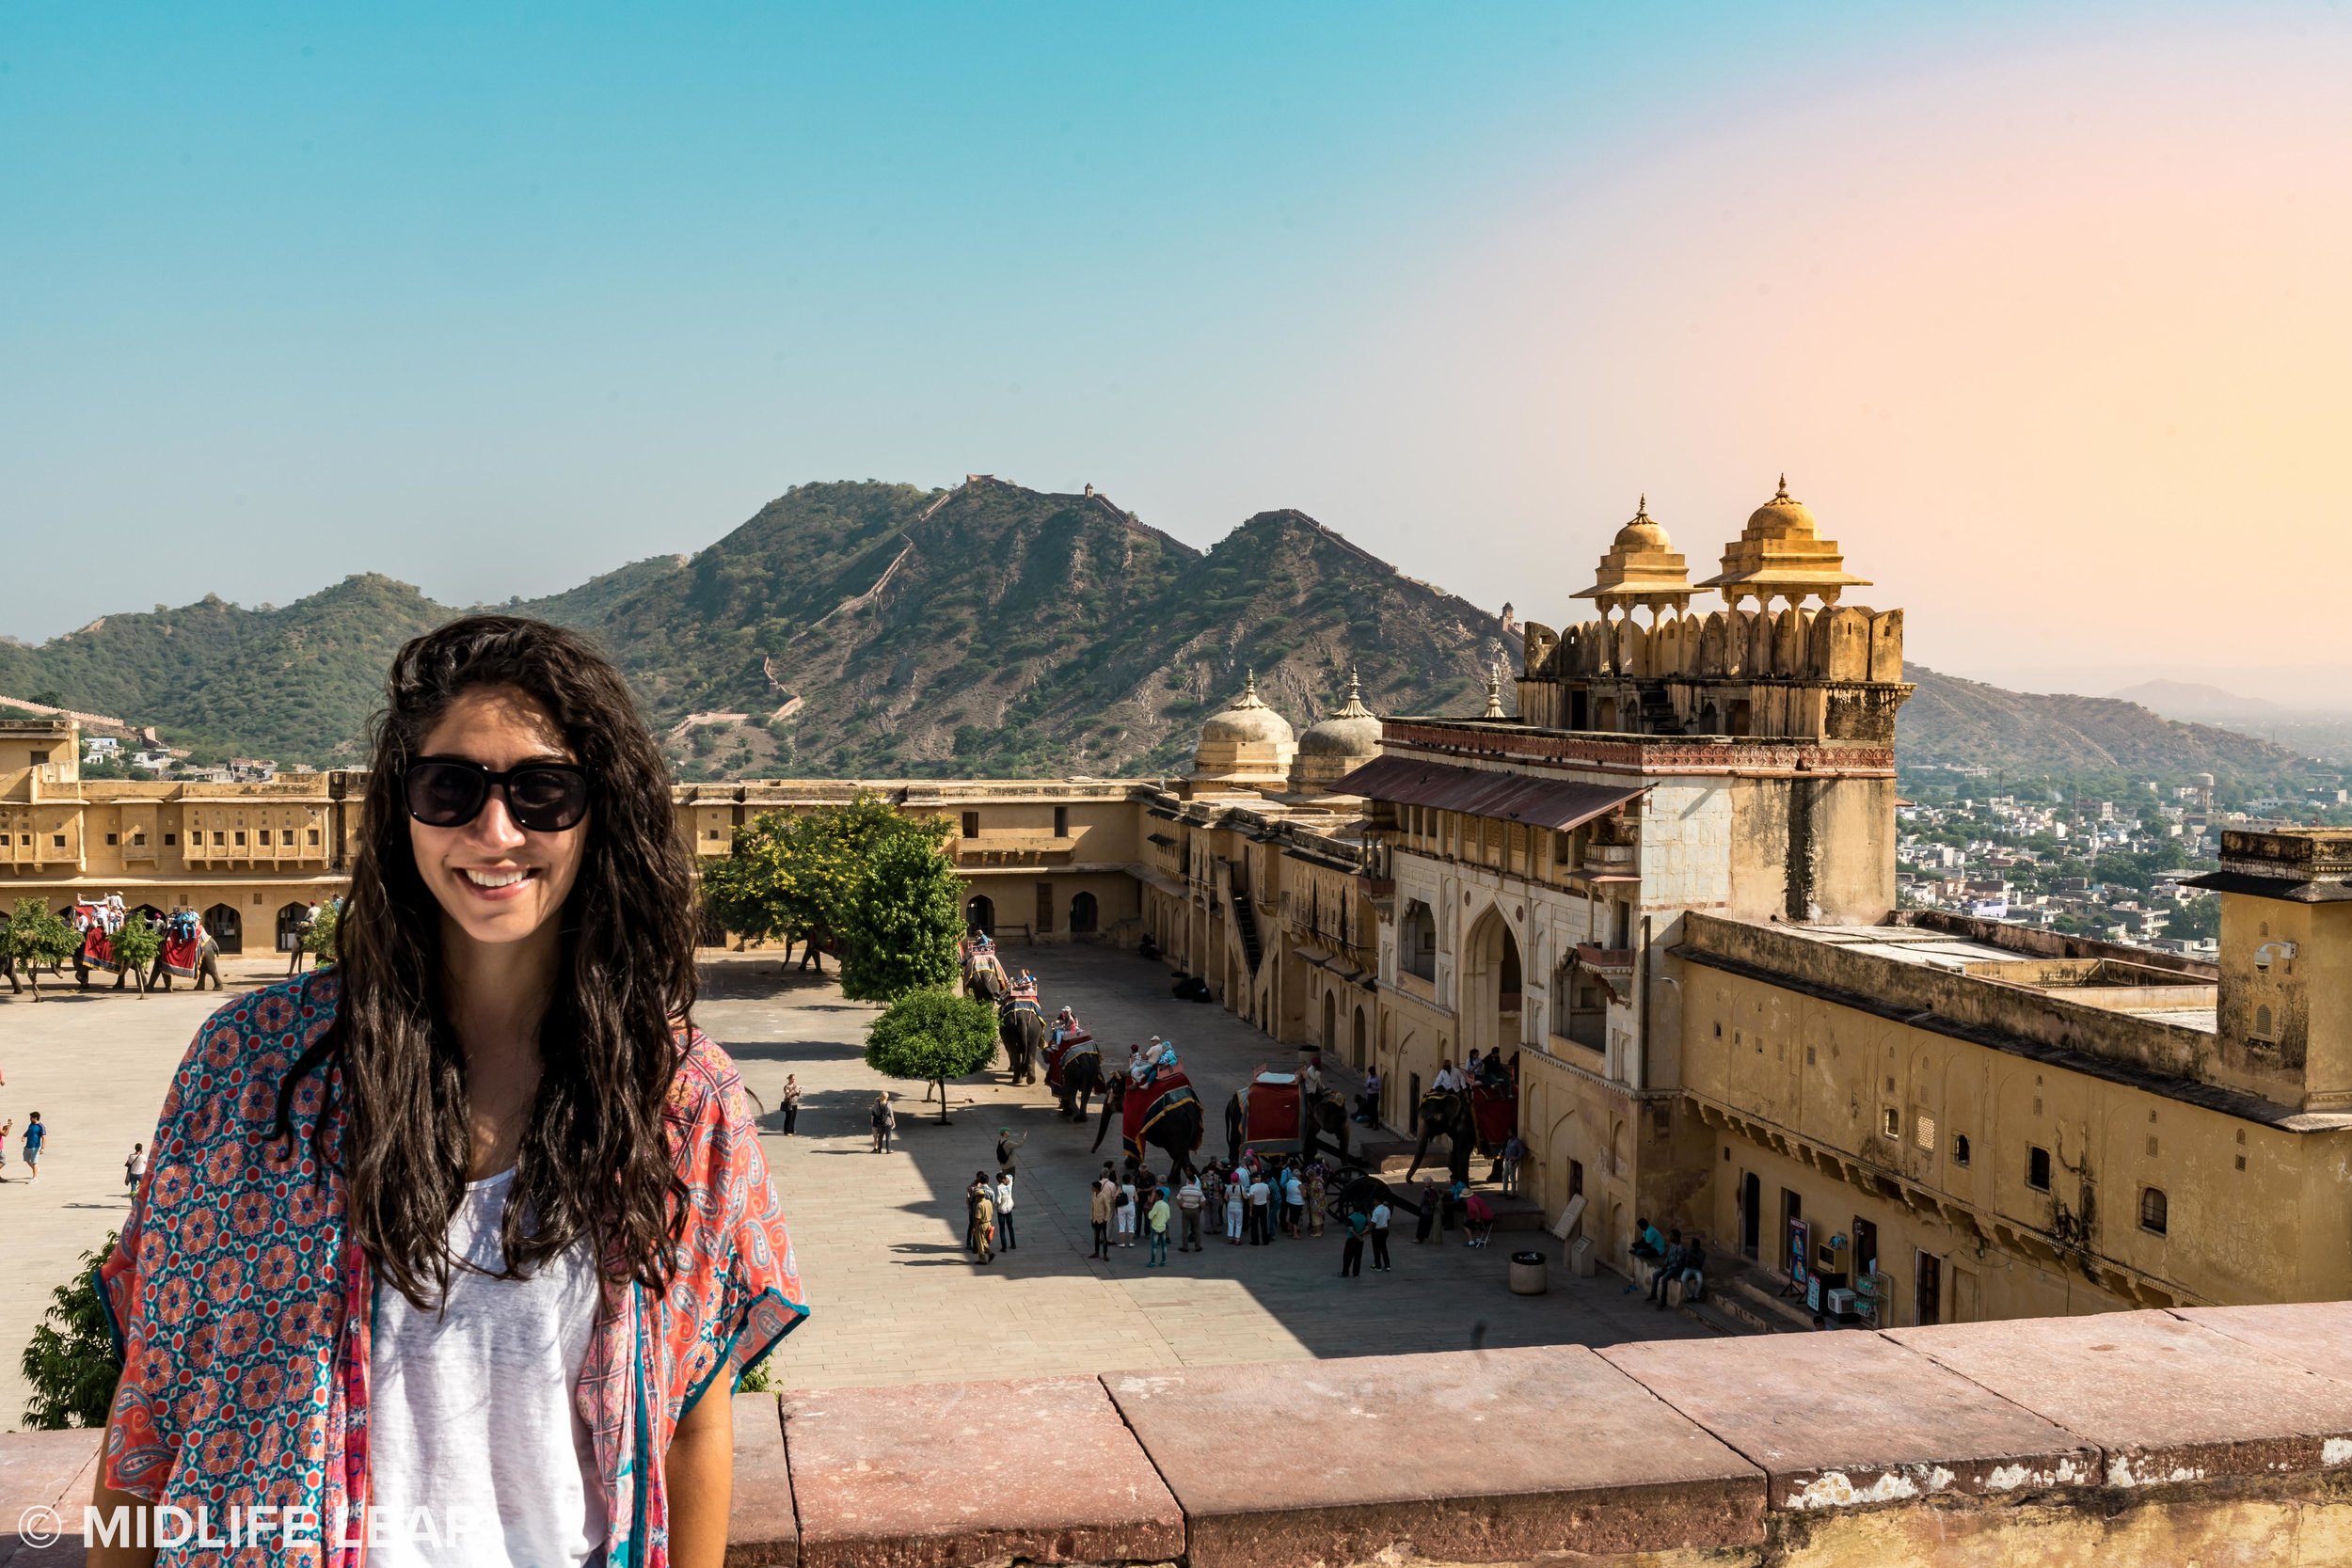 India: Rajasthan and Our Last Stop in the Land of Kings: Jaipur, The Pink City